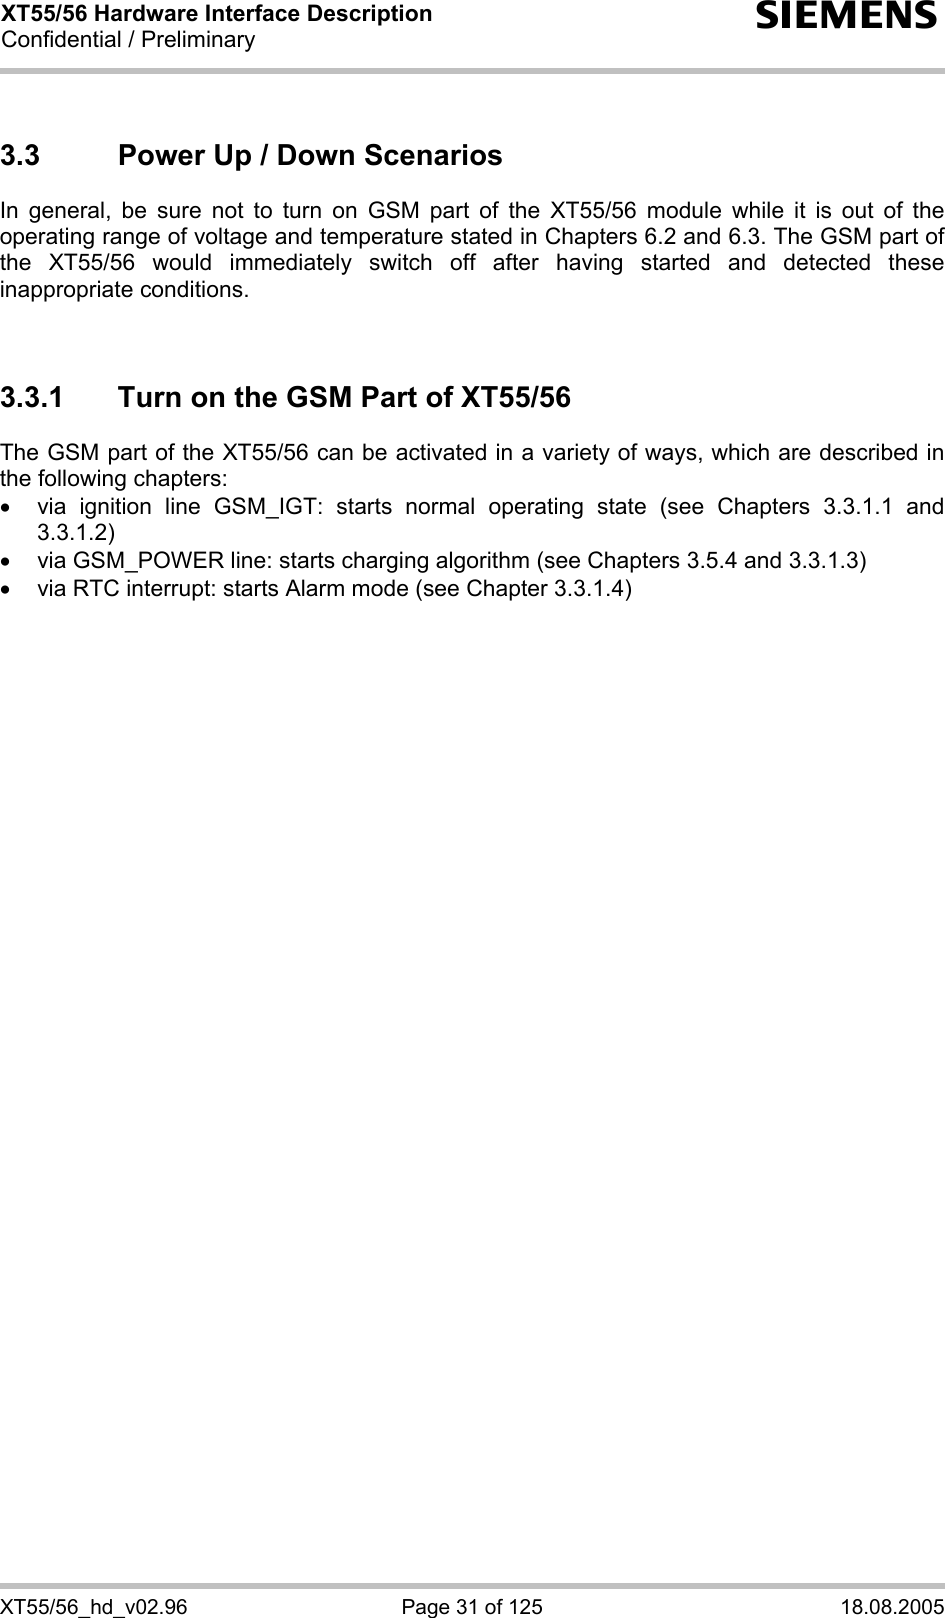 XT55/56 Hardware Interface Description Confidential / Preliminary s XT55/56_hd_v02.96  Page 31 of 125  18.08.2005 3.3  Power Up / Down Scenarios In general, be sure not to turn on GSM part of the XT55/56 module while it is out of the operating range of voltage and temperature stated in Chapters 6.2 and 6.3. The GSM part of the XT55/56 would immediately switch off after having started and detected these inappropriate conditions.   3.3.1  Turn on the GSM Part of XT55/56 The GSM part of the XT55/56 can be activated in a variety of ways, which are described in the following chapters: •  via ignition line GSM_IGT: starts normal operating state (see Chapters 3.3.1.1 and 3.3.1.2) •  via GSM_POWER line: starts charging algorithm (see Chapters 3.5.4 and 3.3.1.3) •  via RTC interrupt: starts Alarm mode (see Chapter 3.3.1.4)  